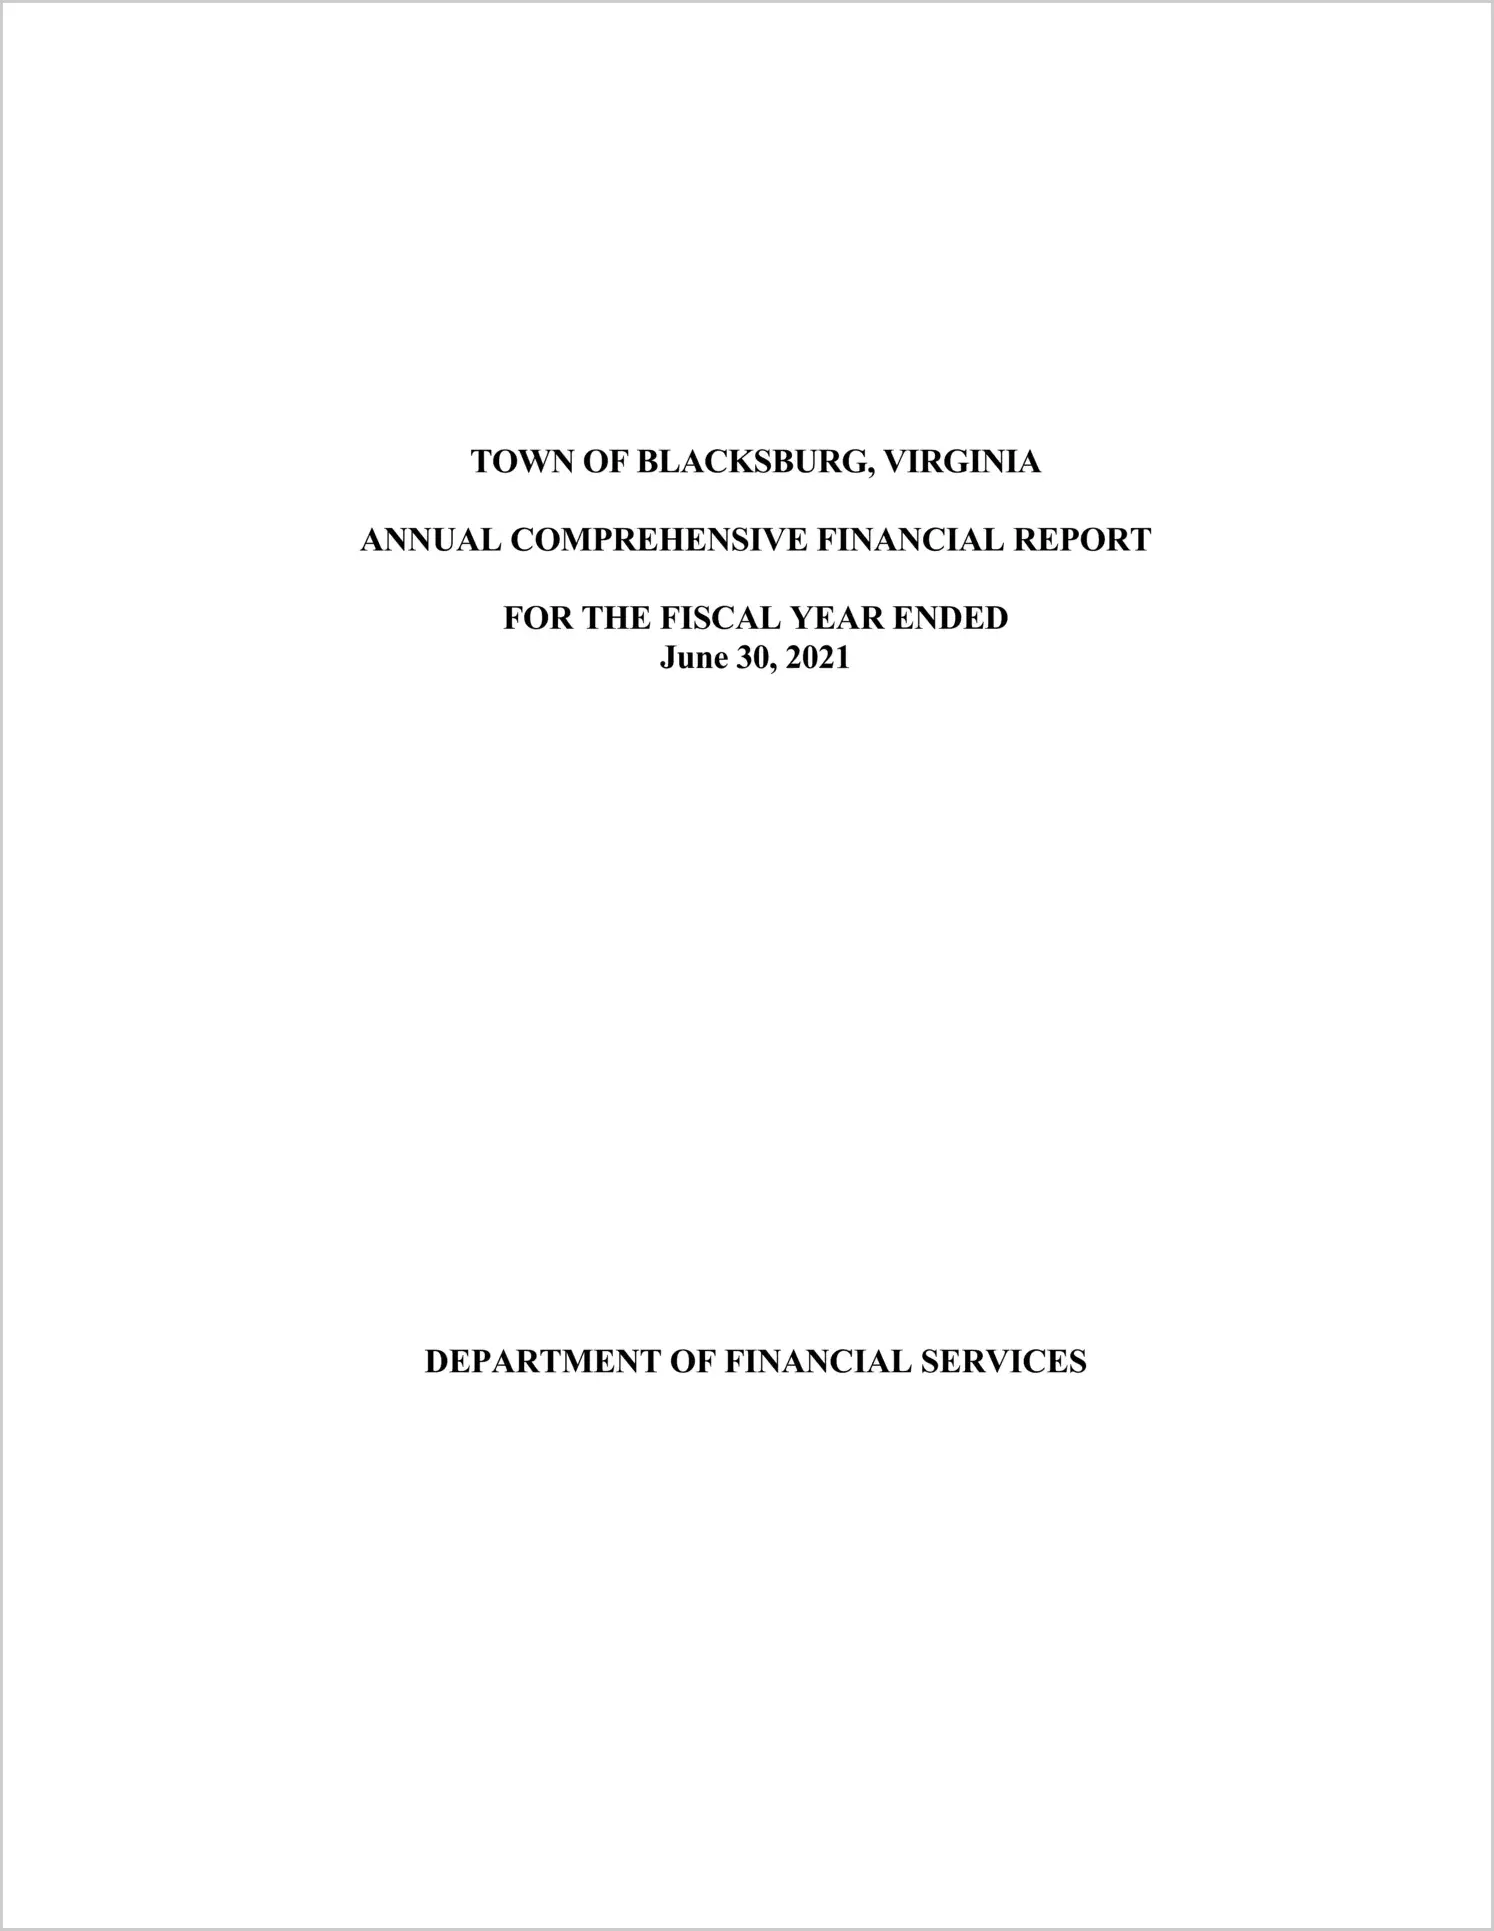 2021 Annual Financial Report for Town of Blacksburg